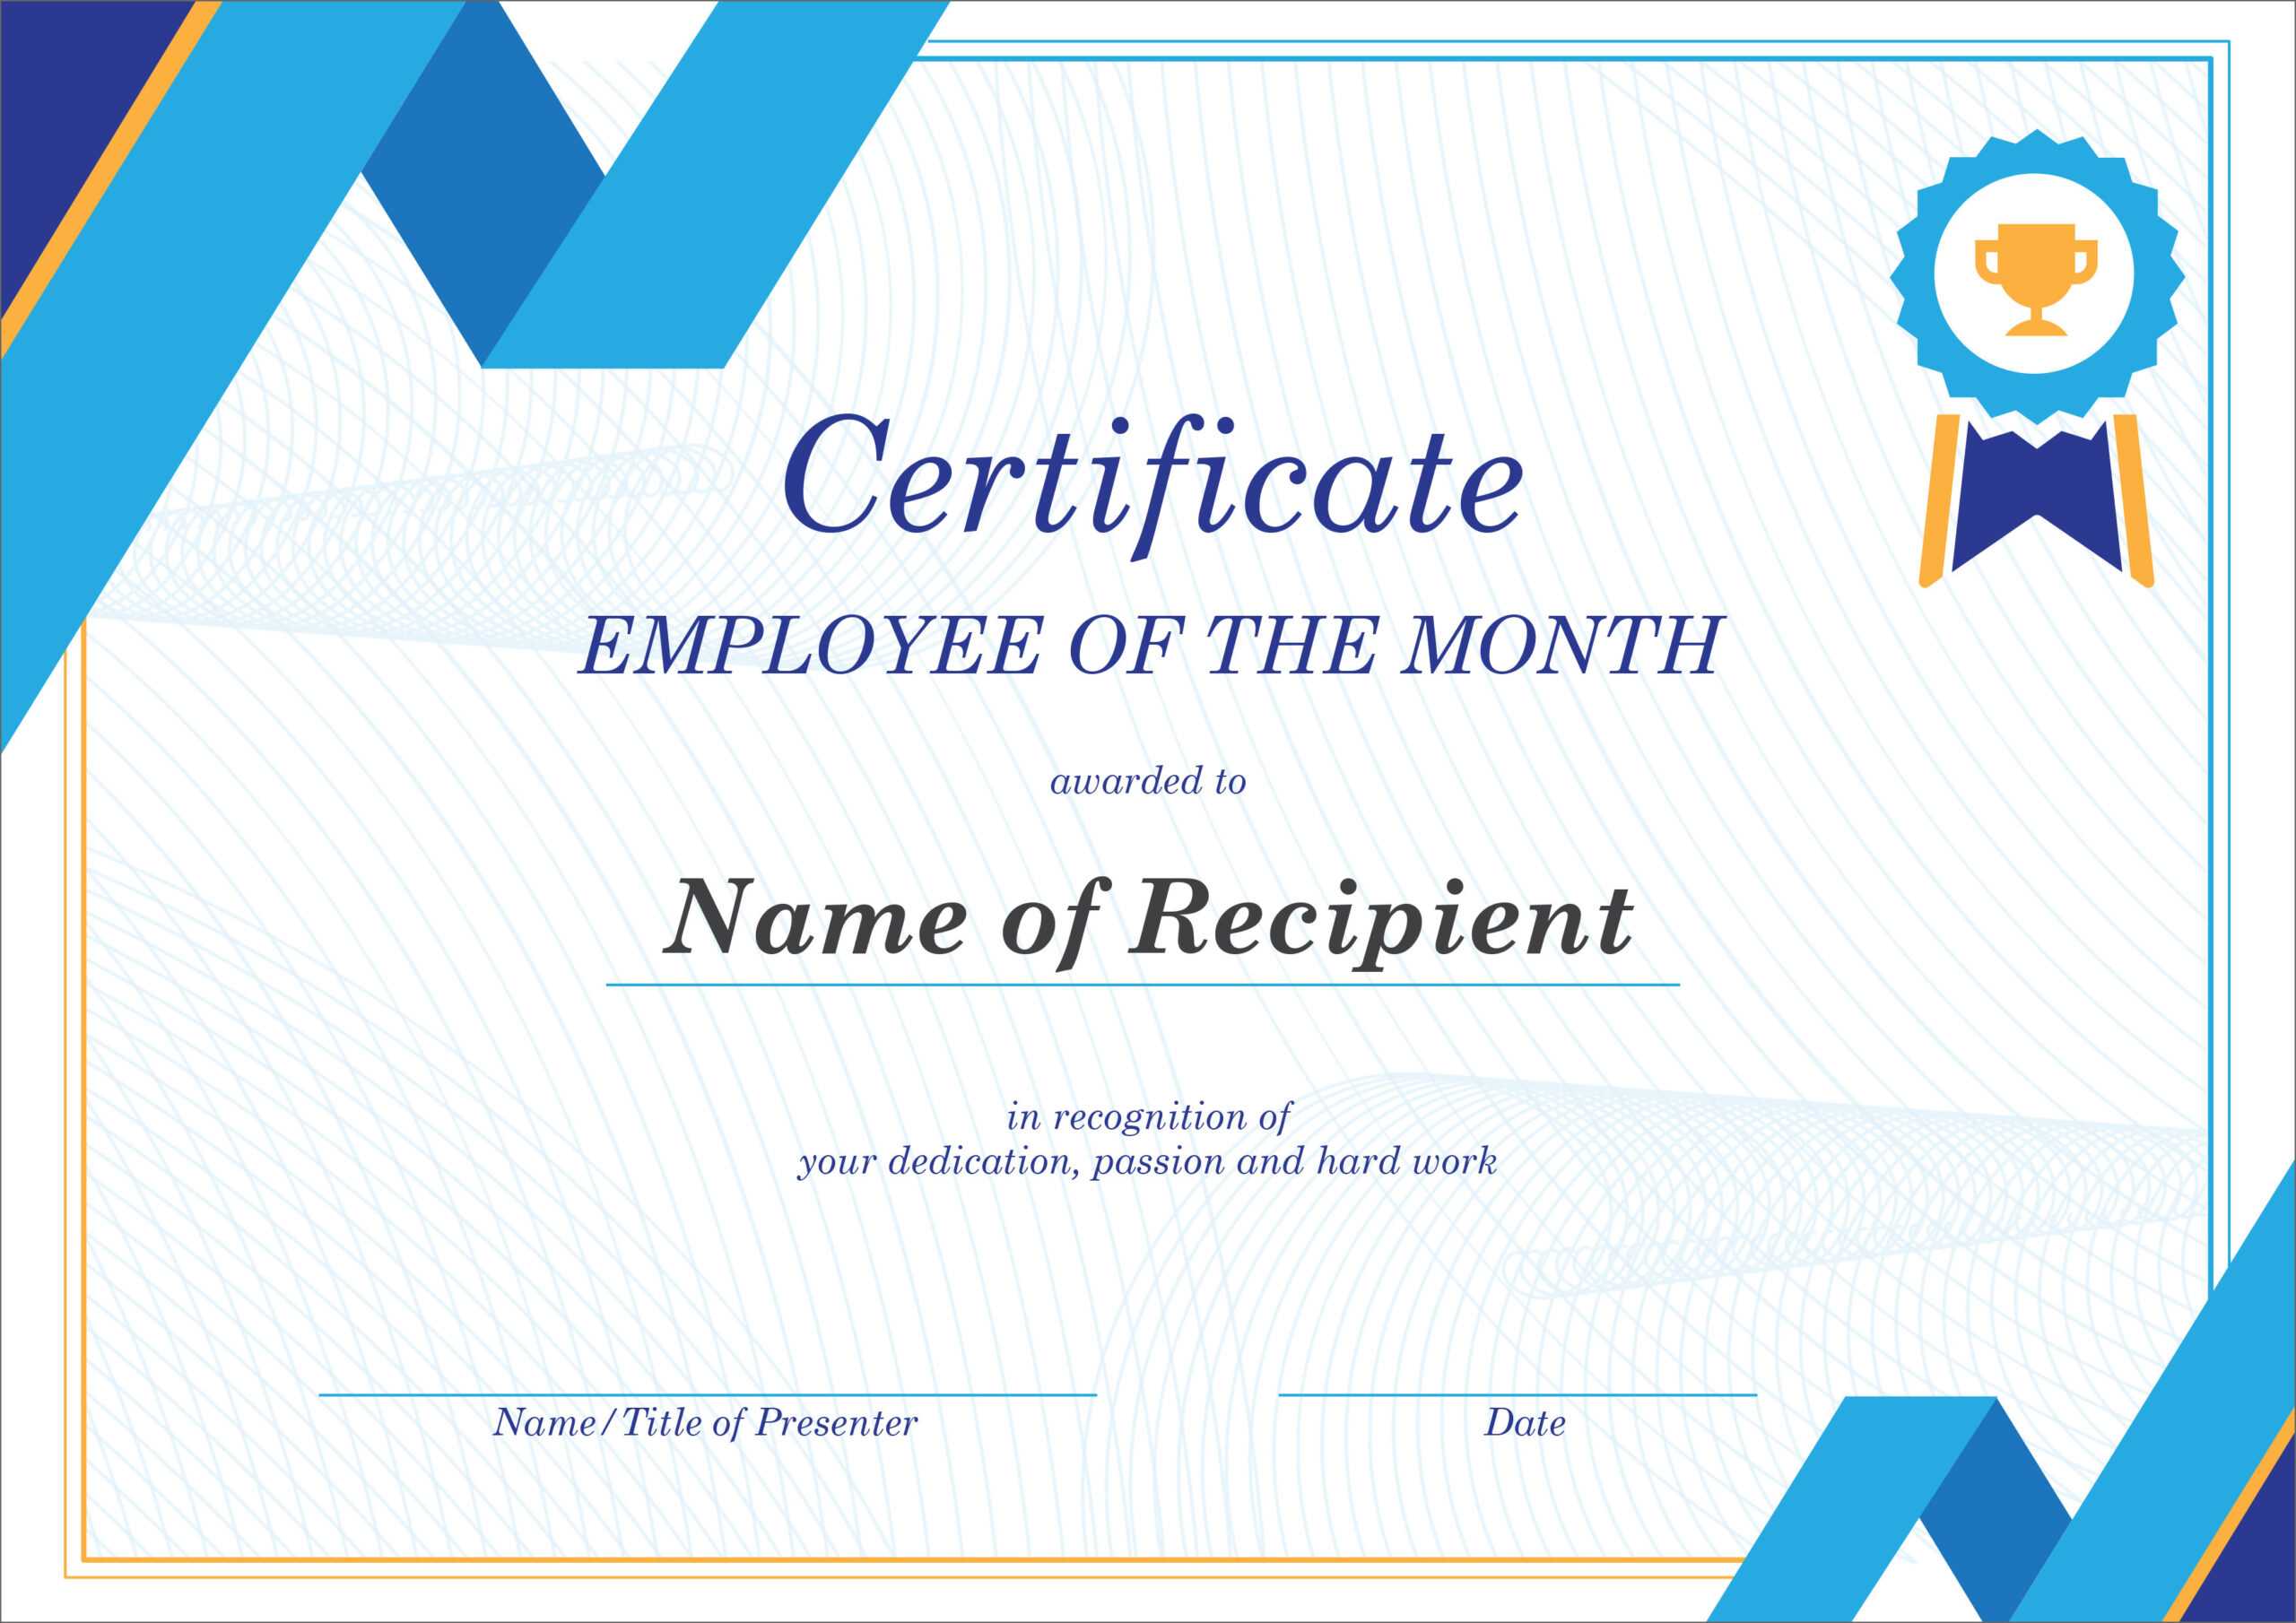 50 Free Creative Blank Certificate Templates In Psd With Regard To Employee Of The Month Certificate Template